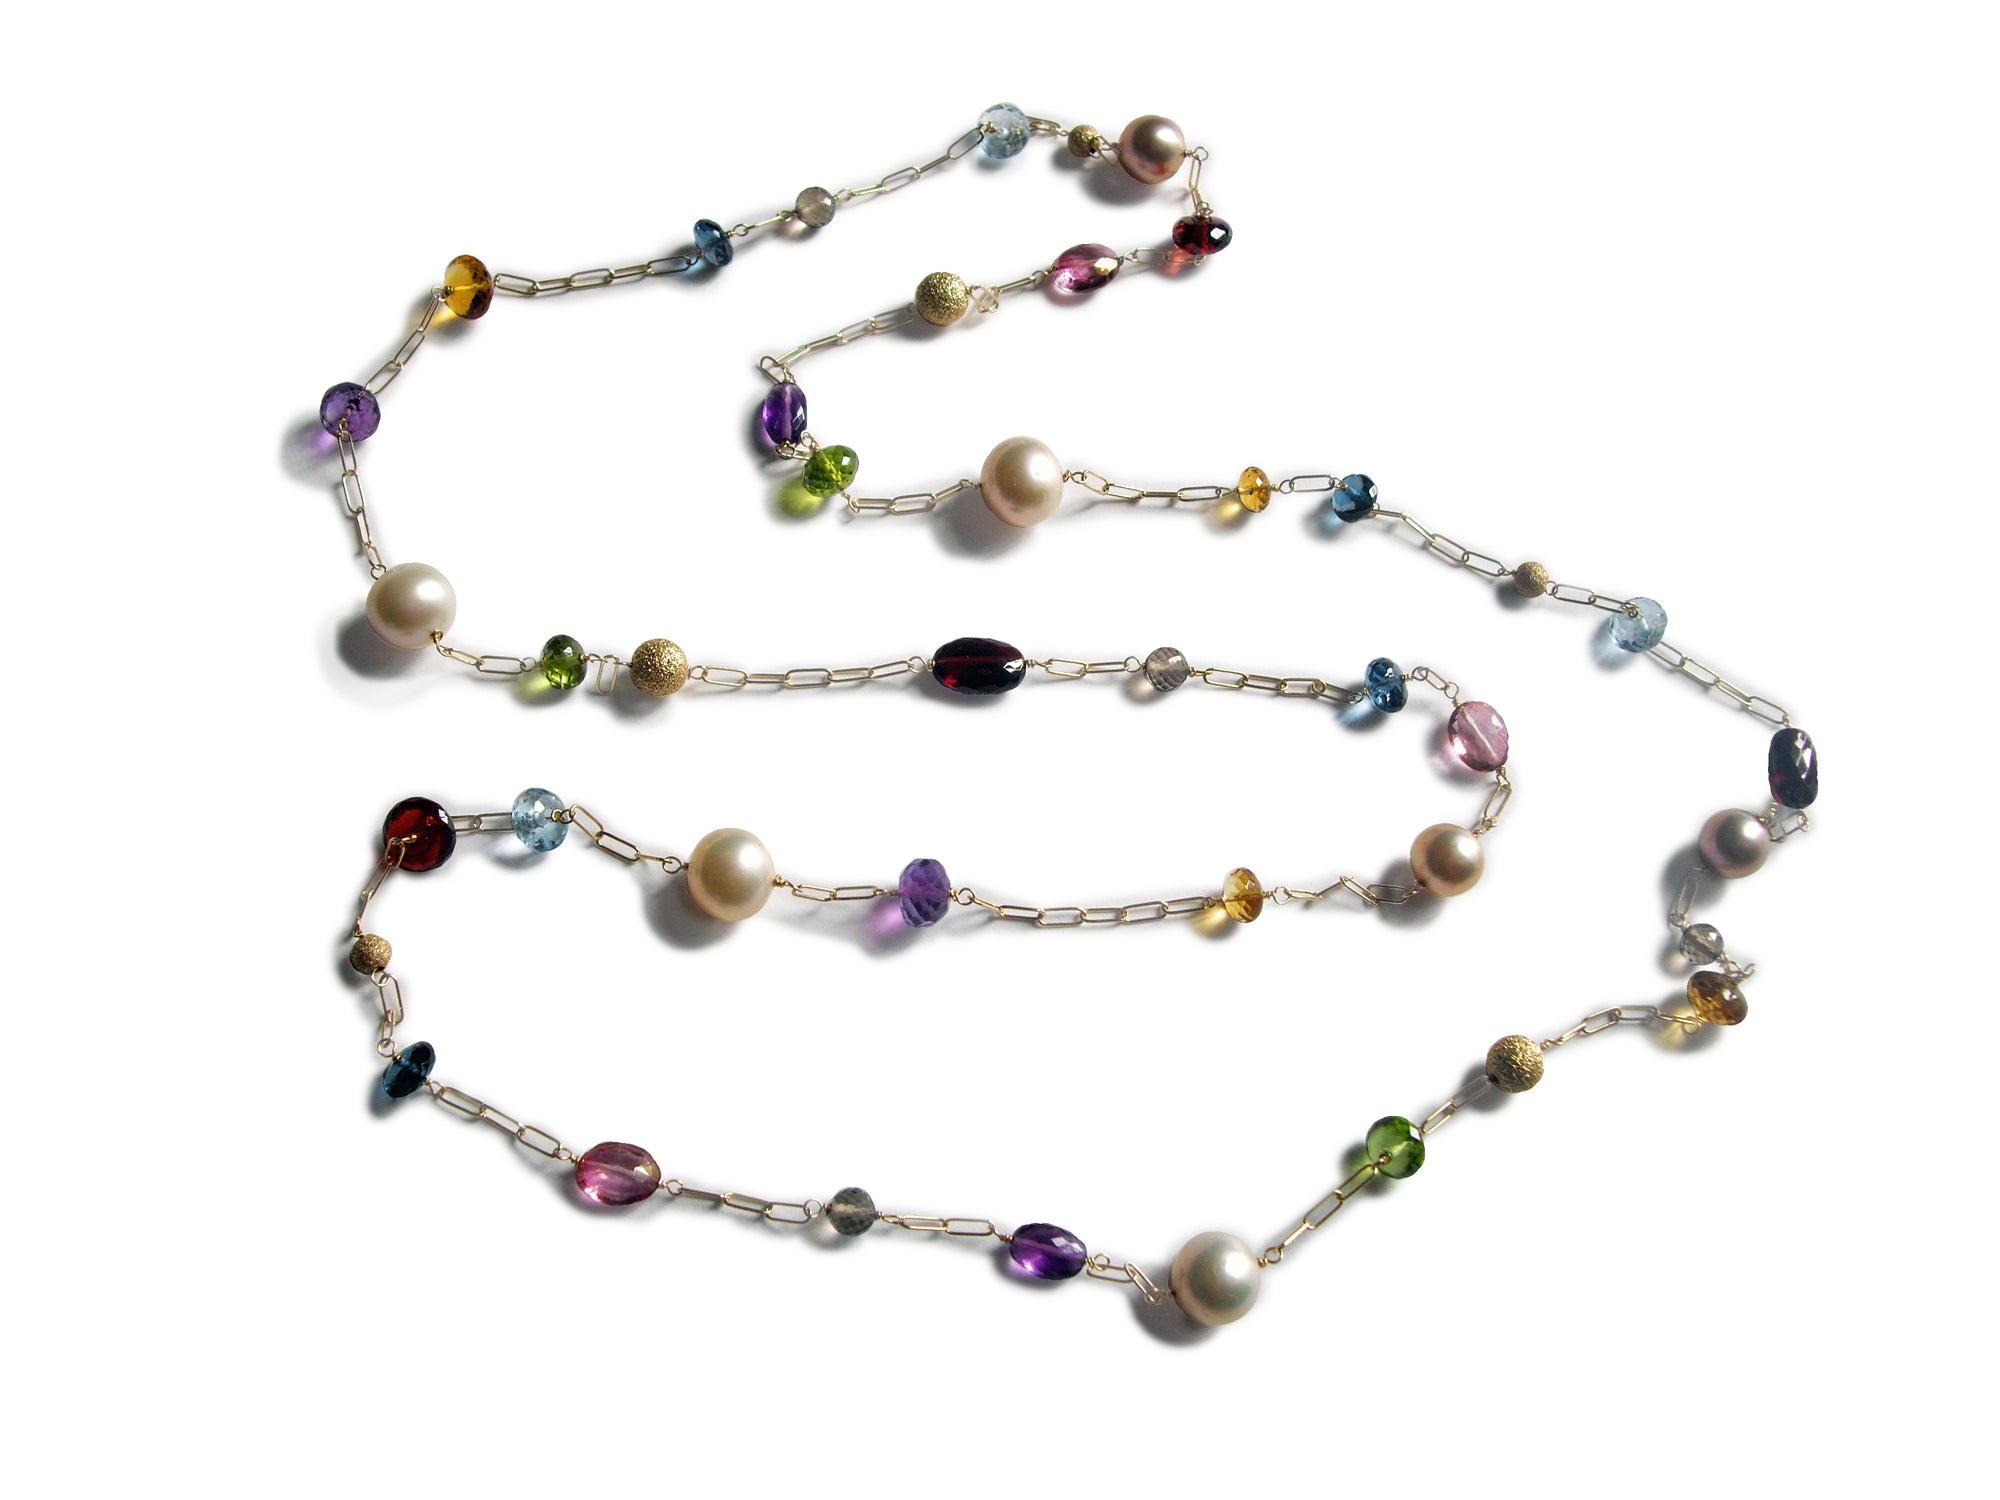 Gem Candy Collection Necklace in 14k Gold